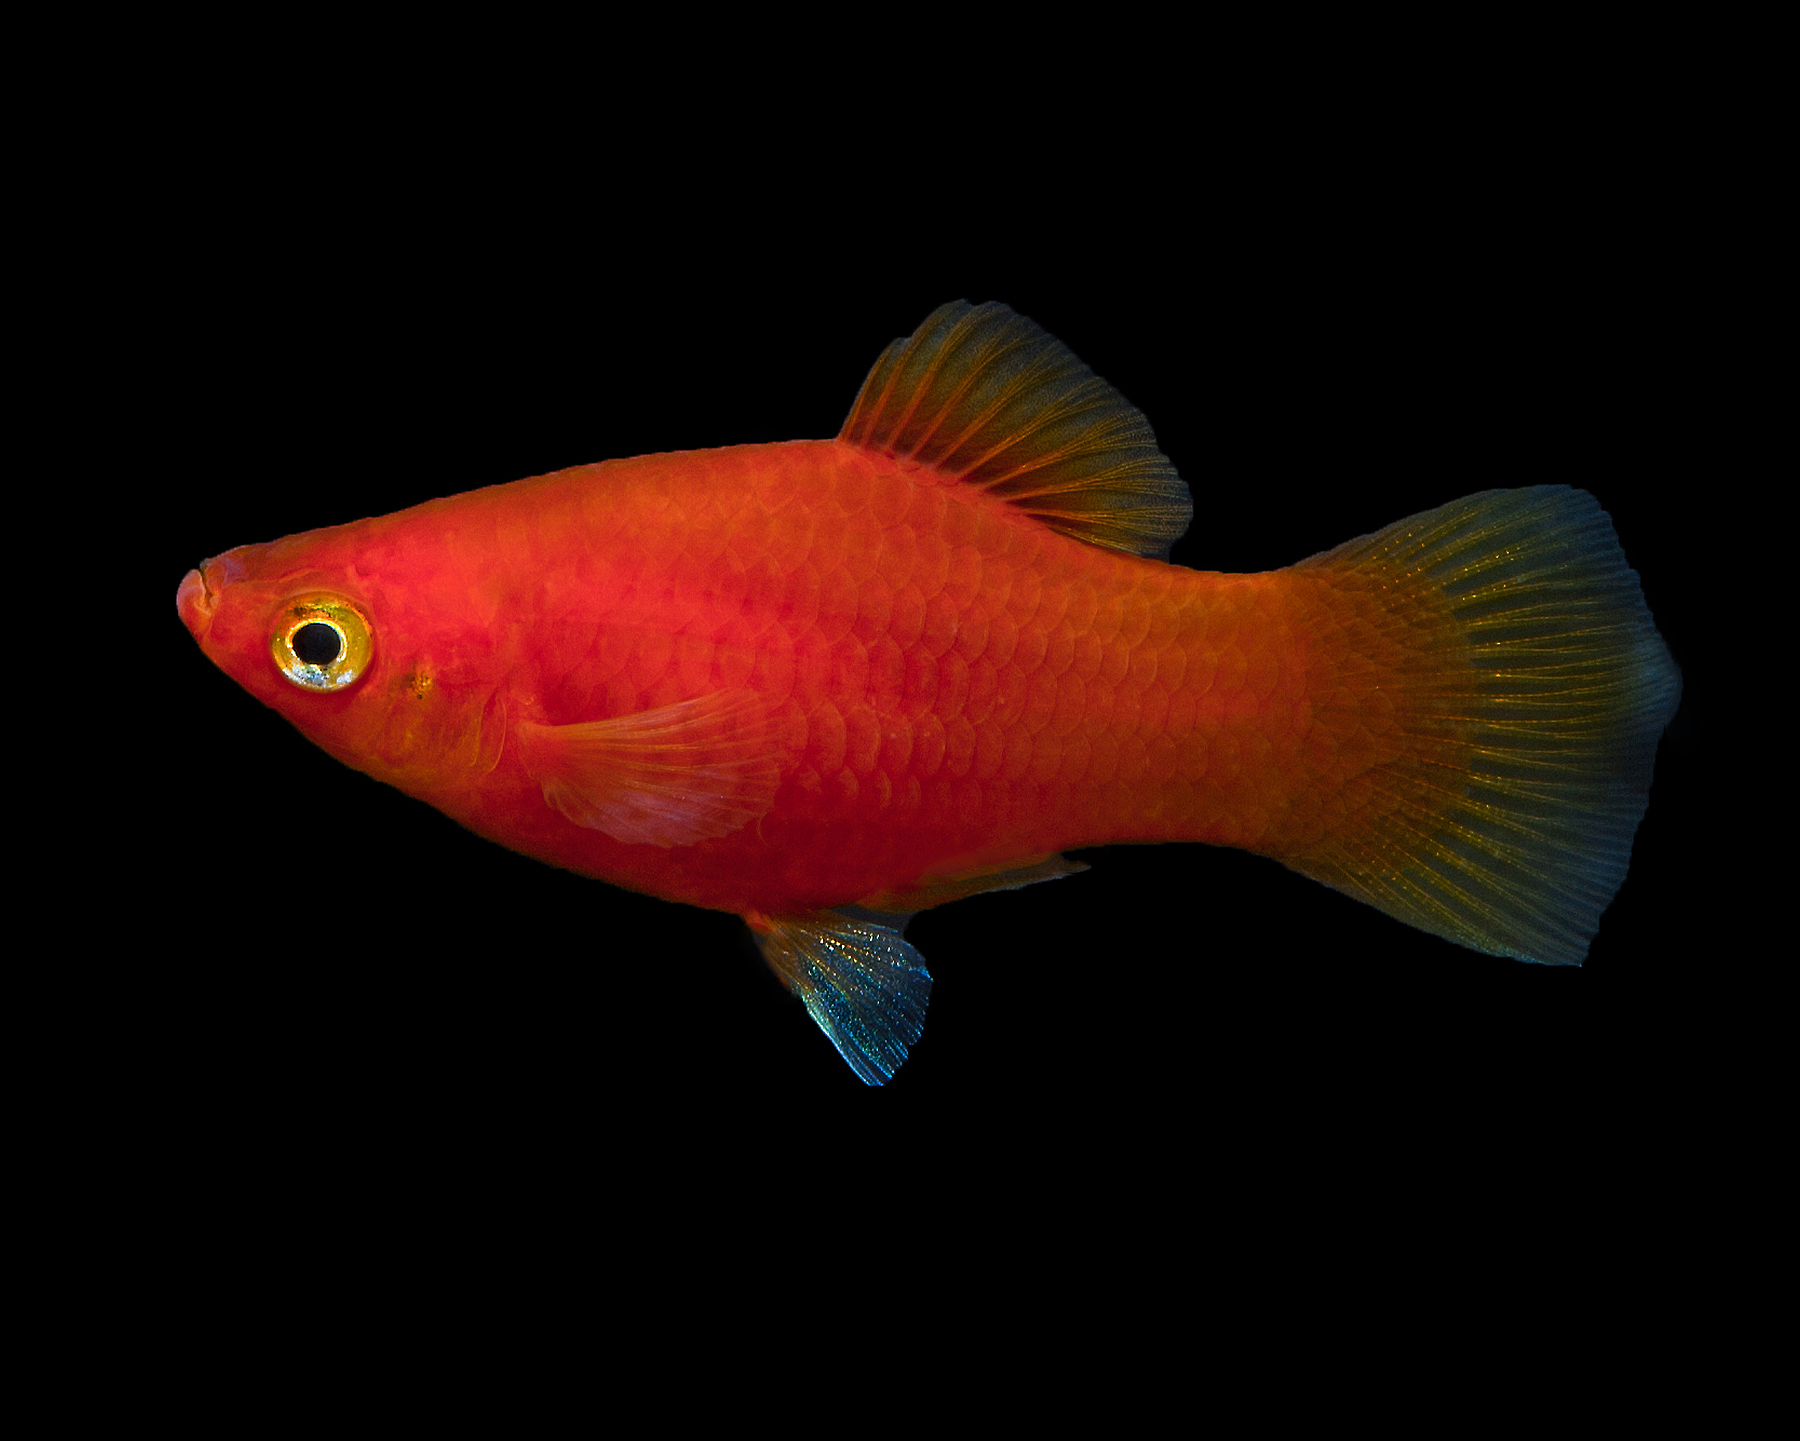 Roter Platy